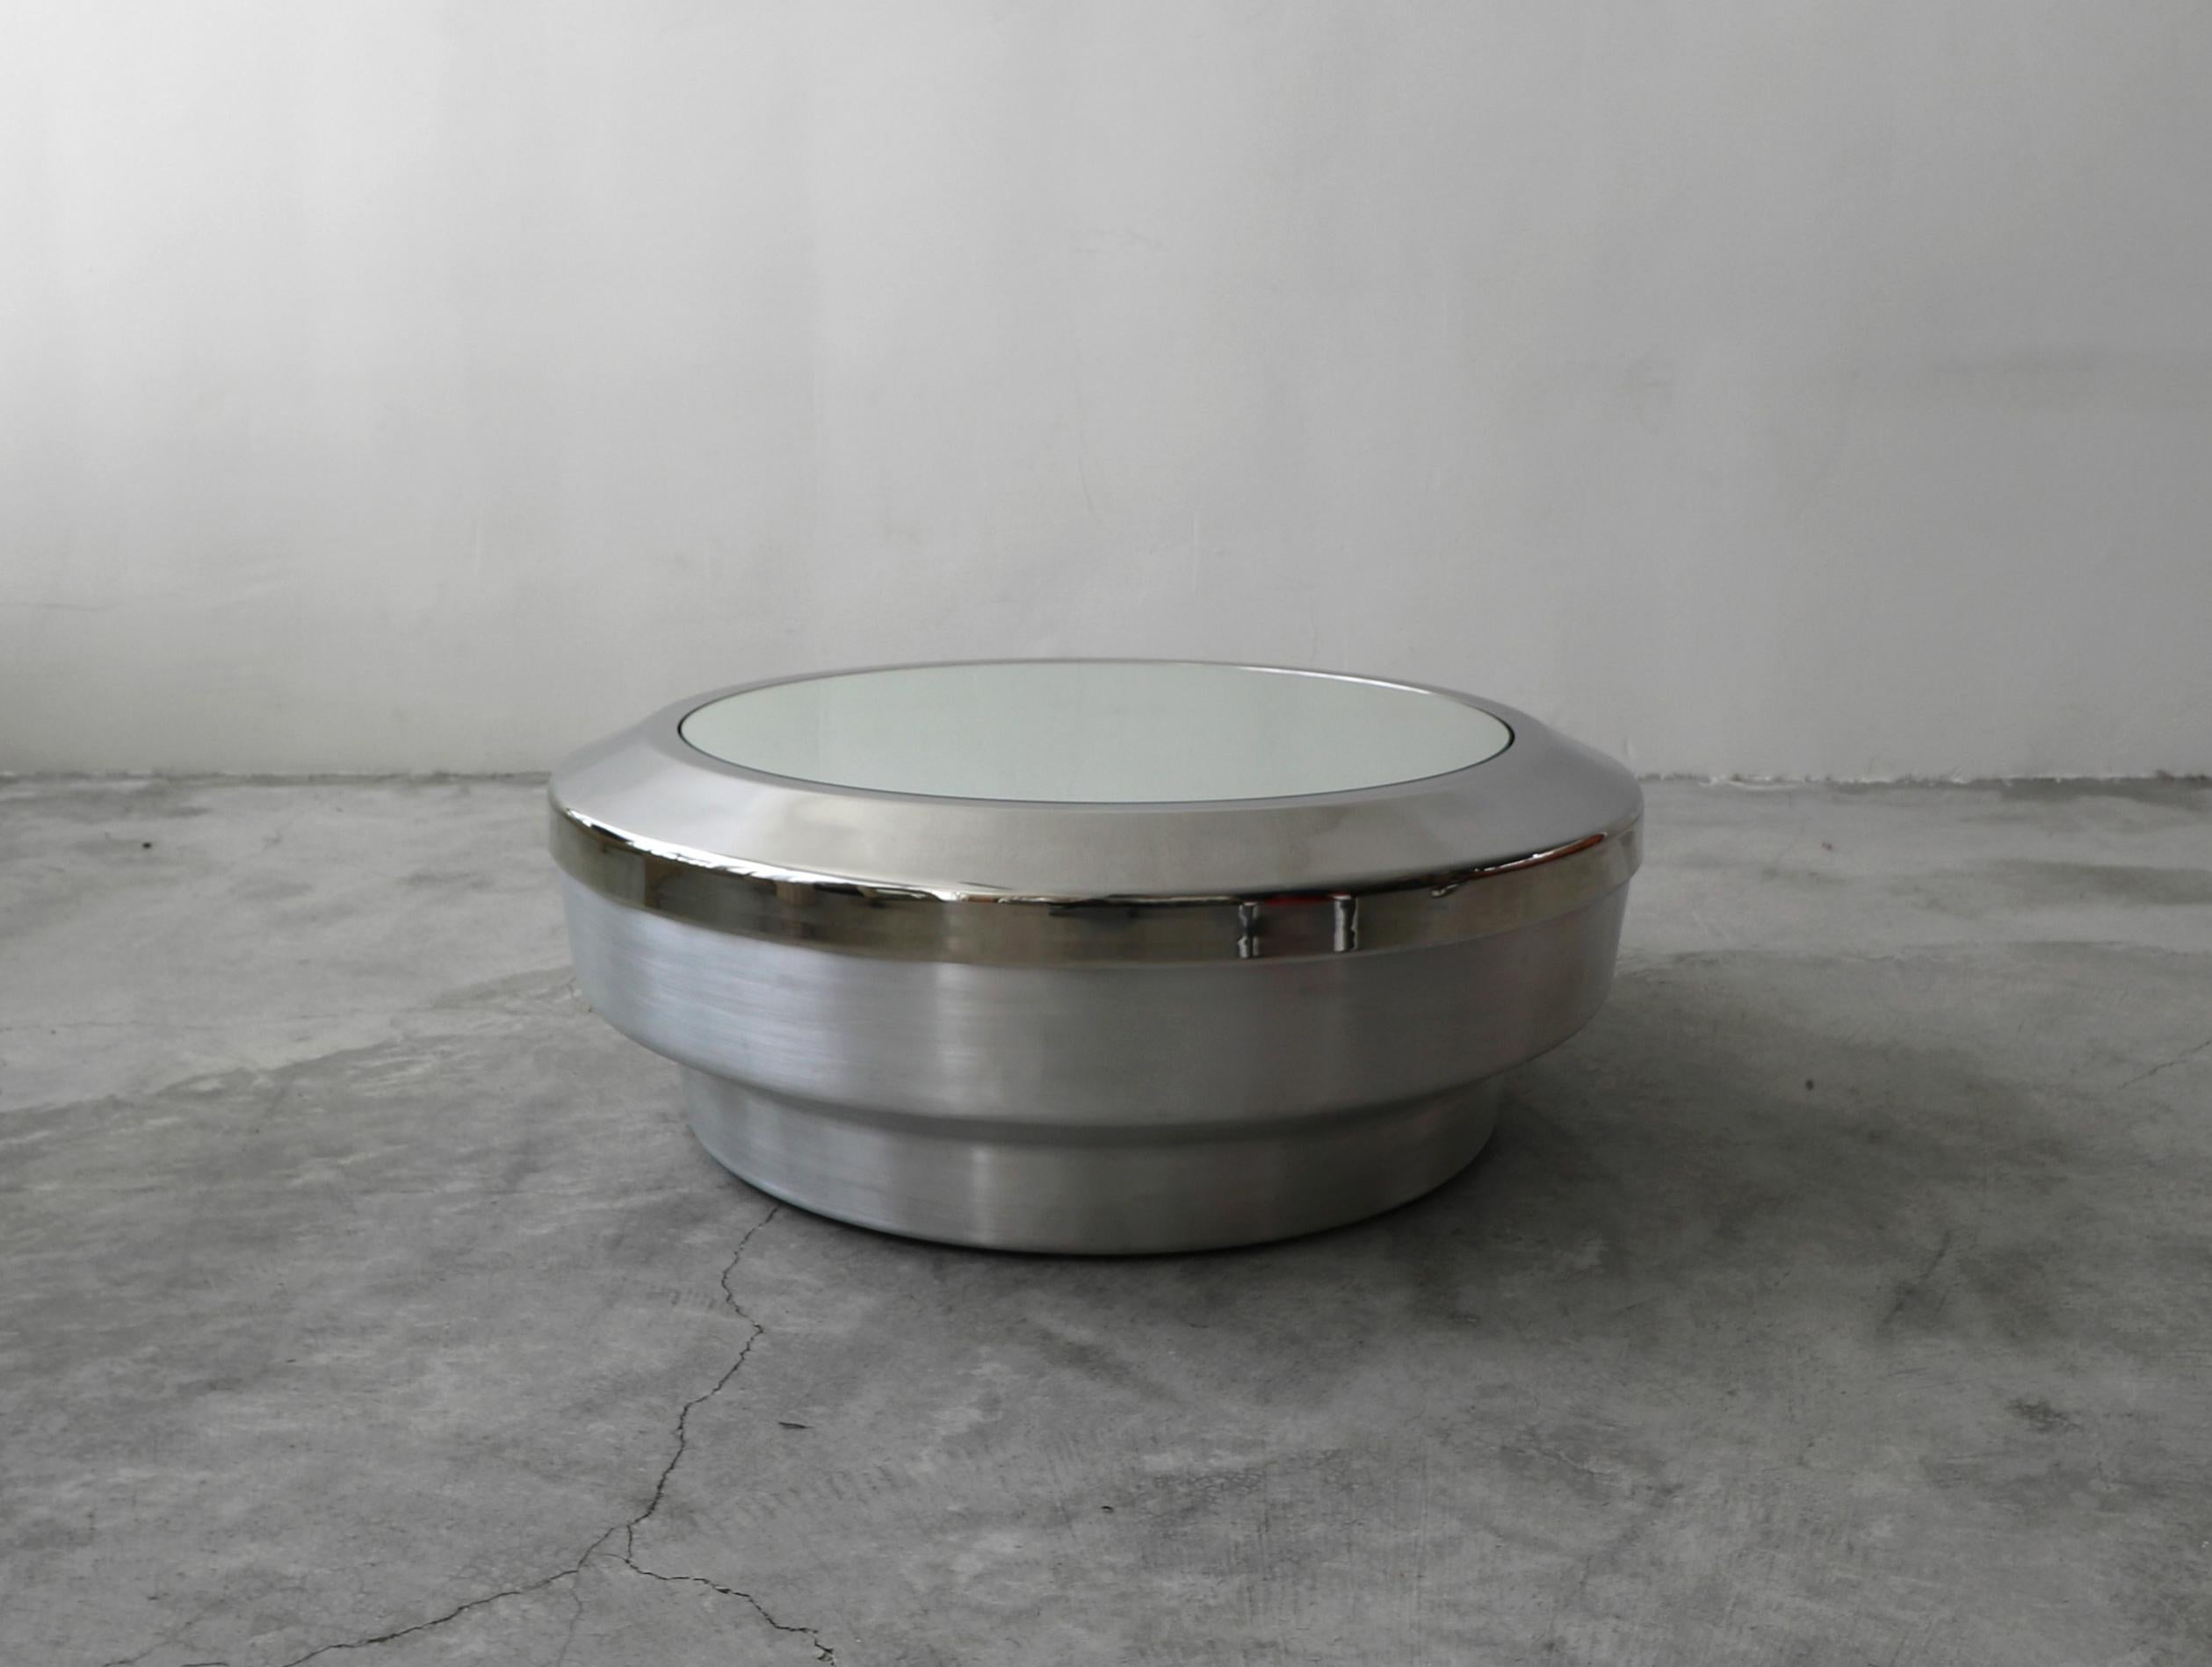 Beautiful Spun aluminum, chrome and mirror drum canister coffee table by architect Gary John Neville. Top is removable to provide a great storage space for blankets, pillows, etc.

Table is in excellent condition with no real damage to be noted.